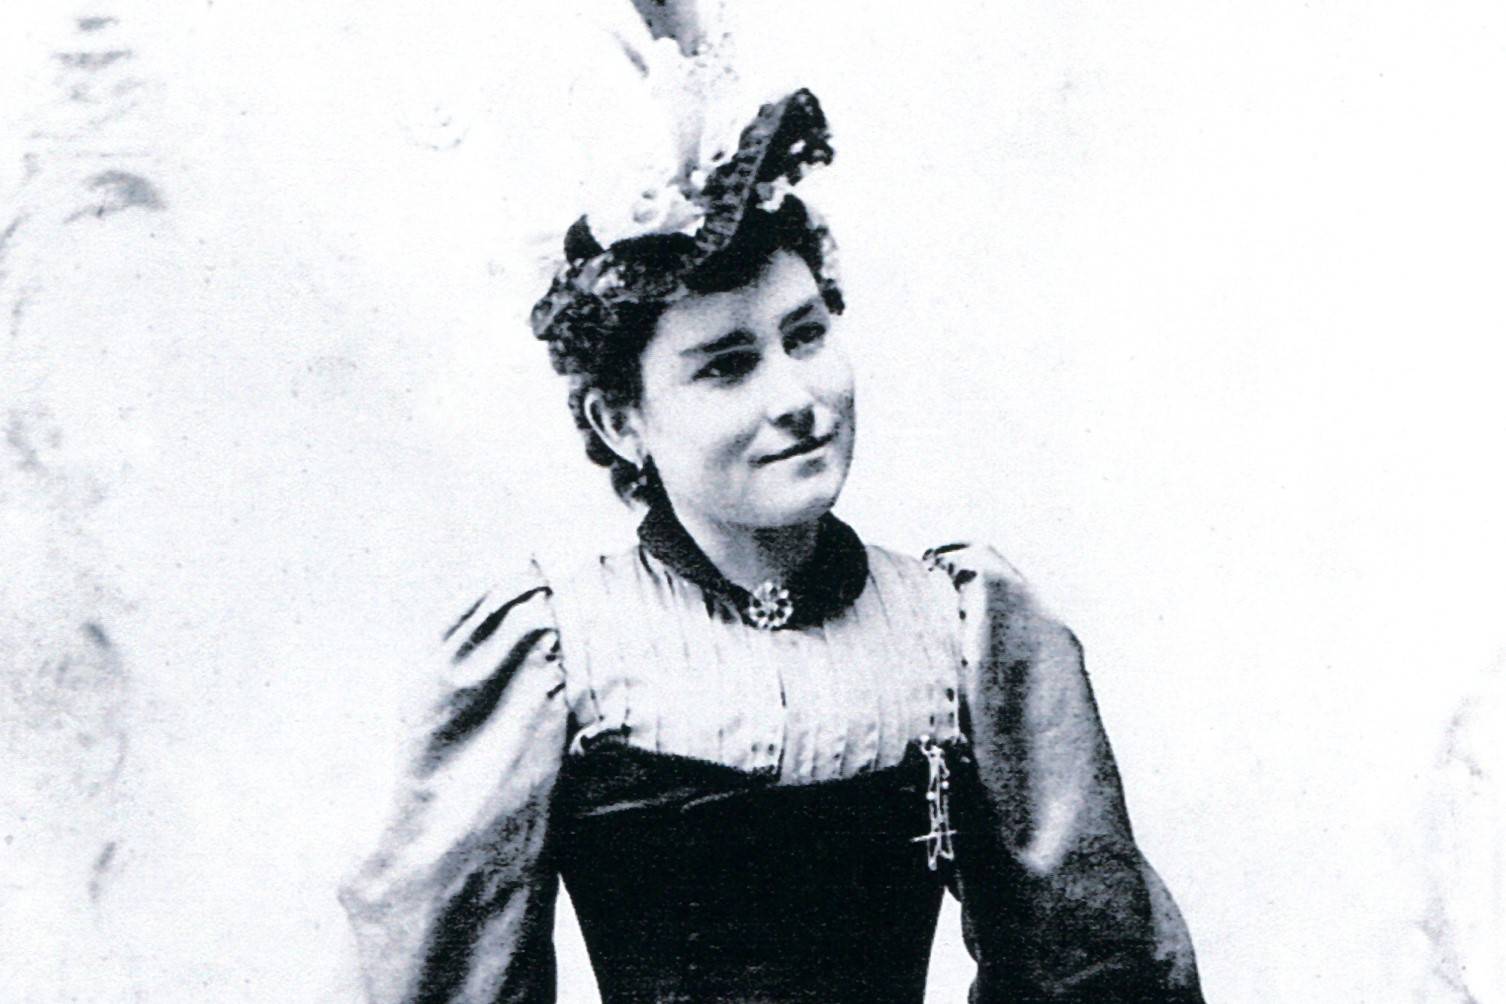 Mollie Walsh, seen here in "cabinet card" photograph from 1894 at age 25 in Butte, Montana, is the subject of a biography by Art Petersen who said Walsh's life is the story of the Klondike Gold Rush. But, Petersen said, there was quite a lot of fact to be sorted from the fictions recorded about Walsh's life. (James Schultz / Courtesy of Richard Gibson via Art Petersen)